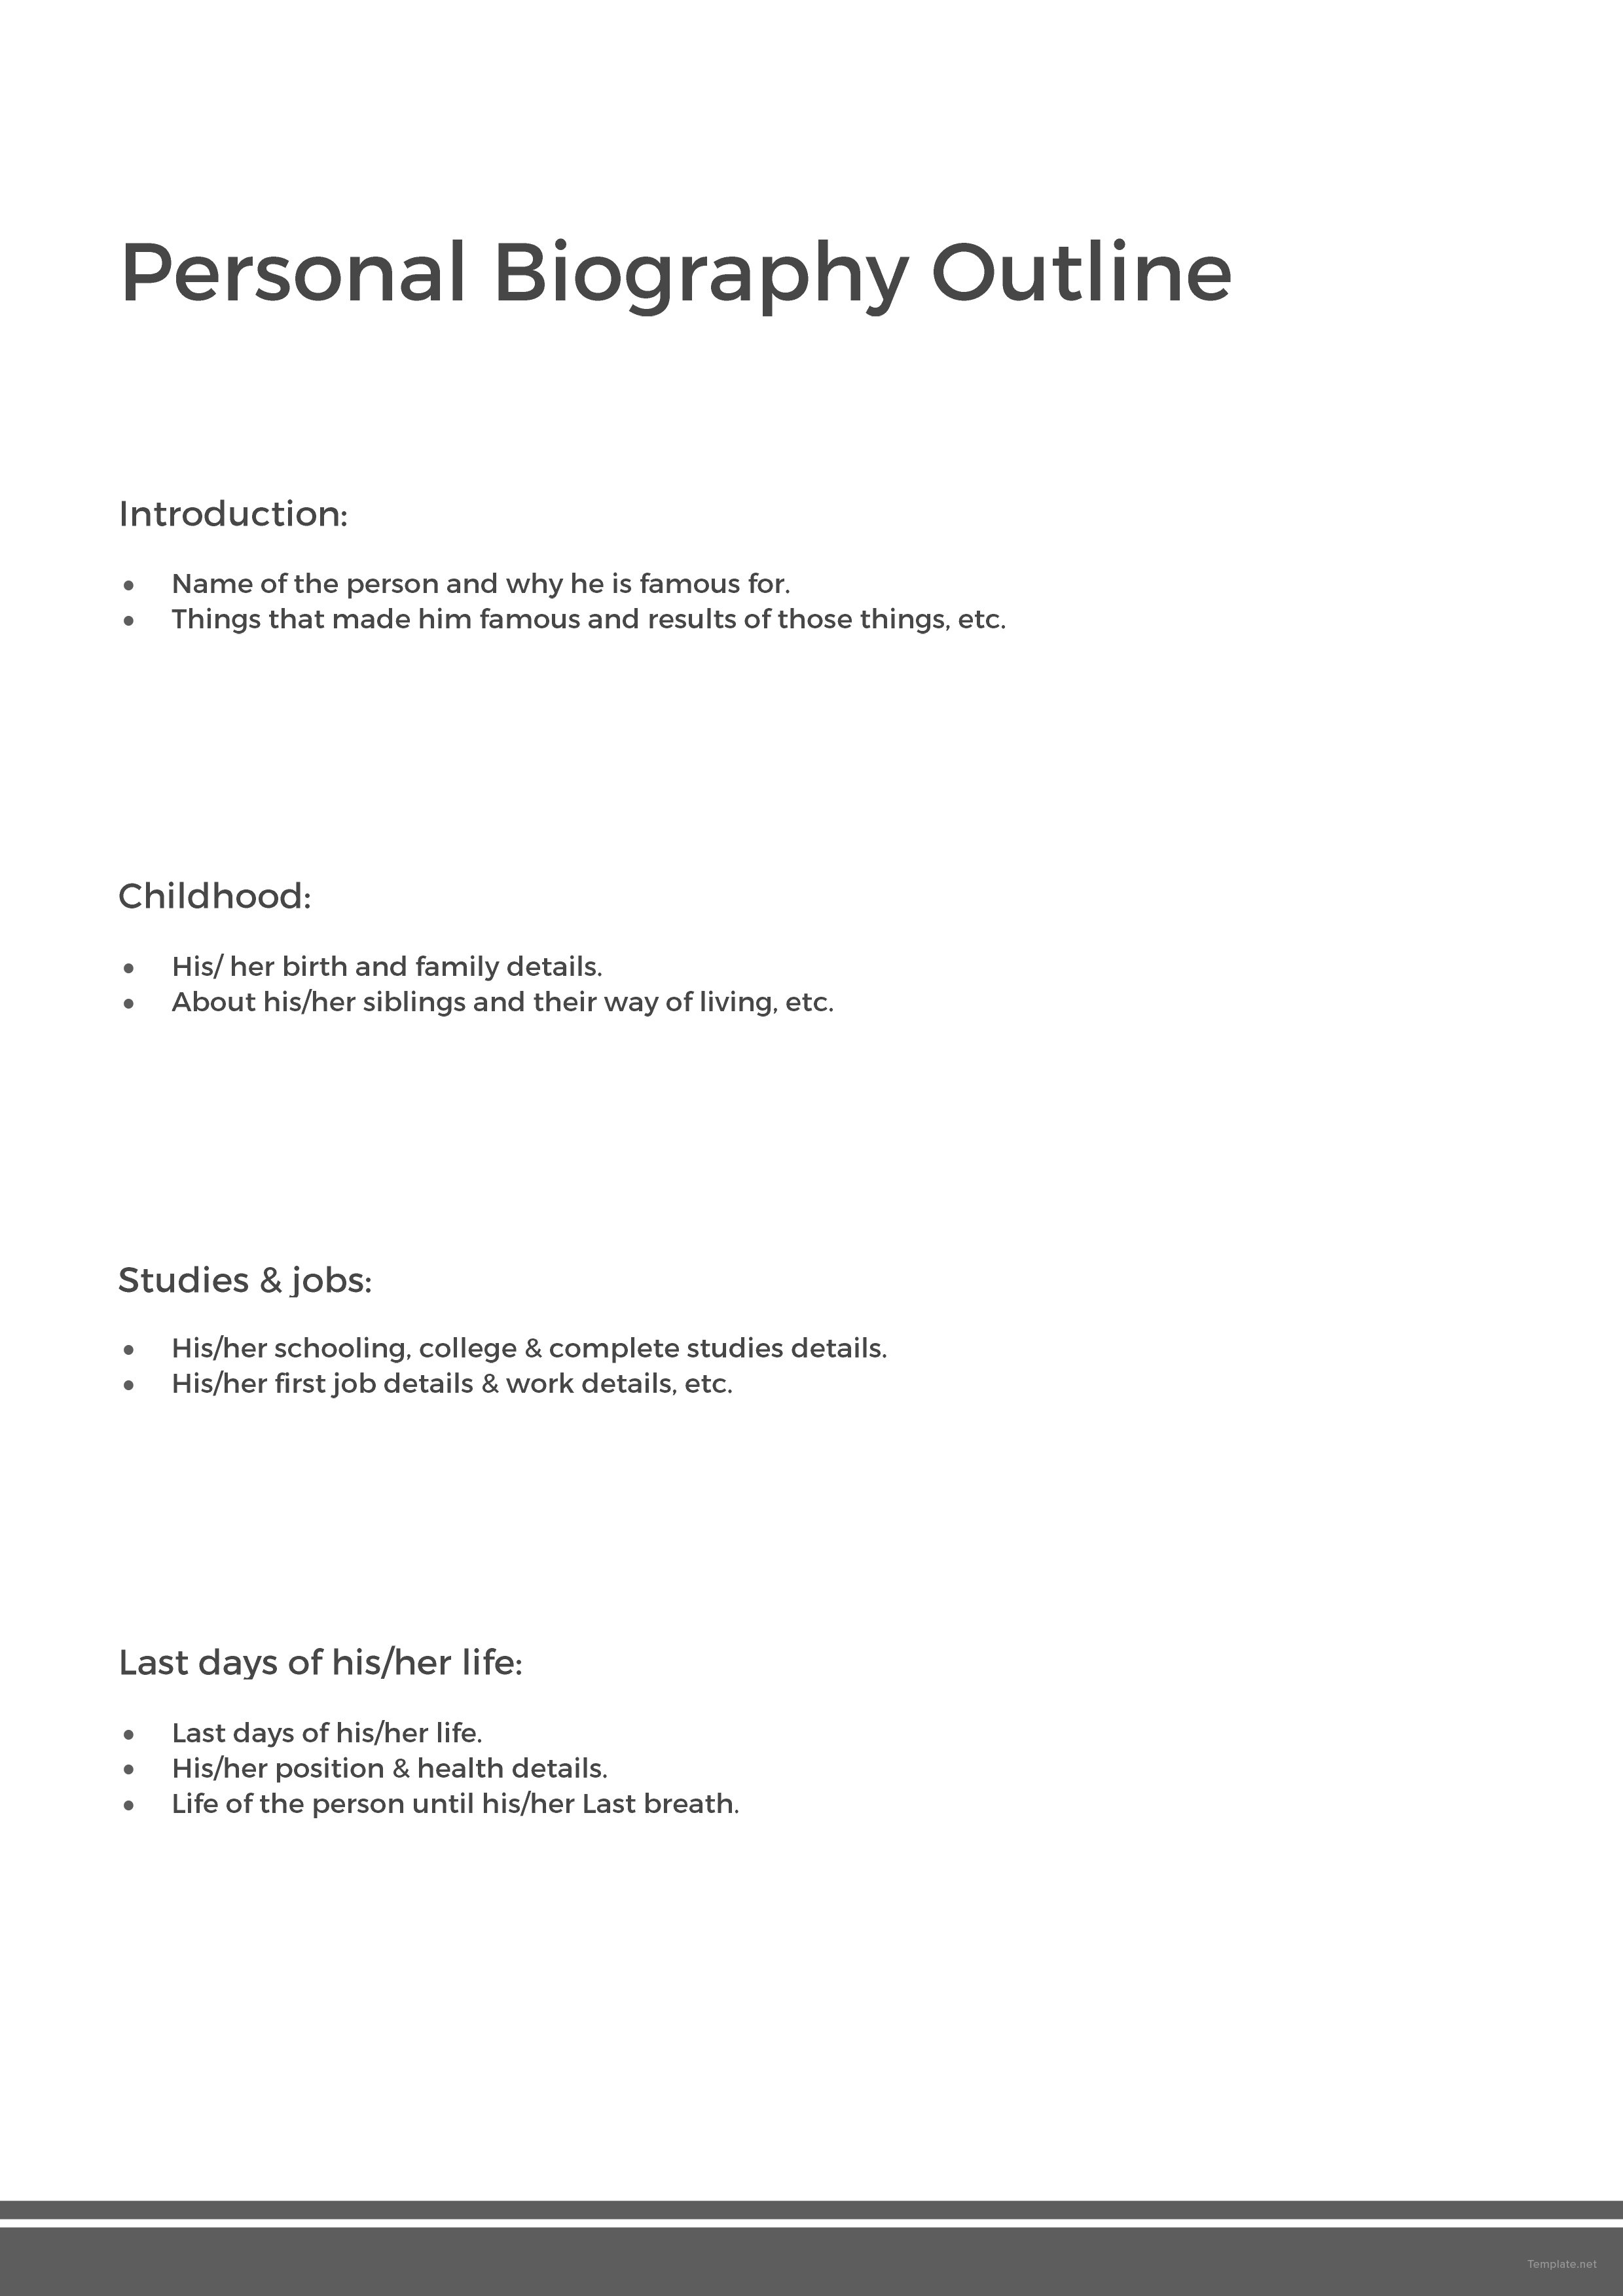 Biography Outline Template